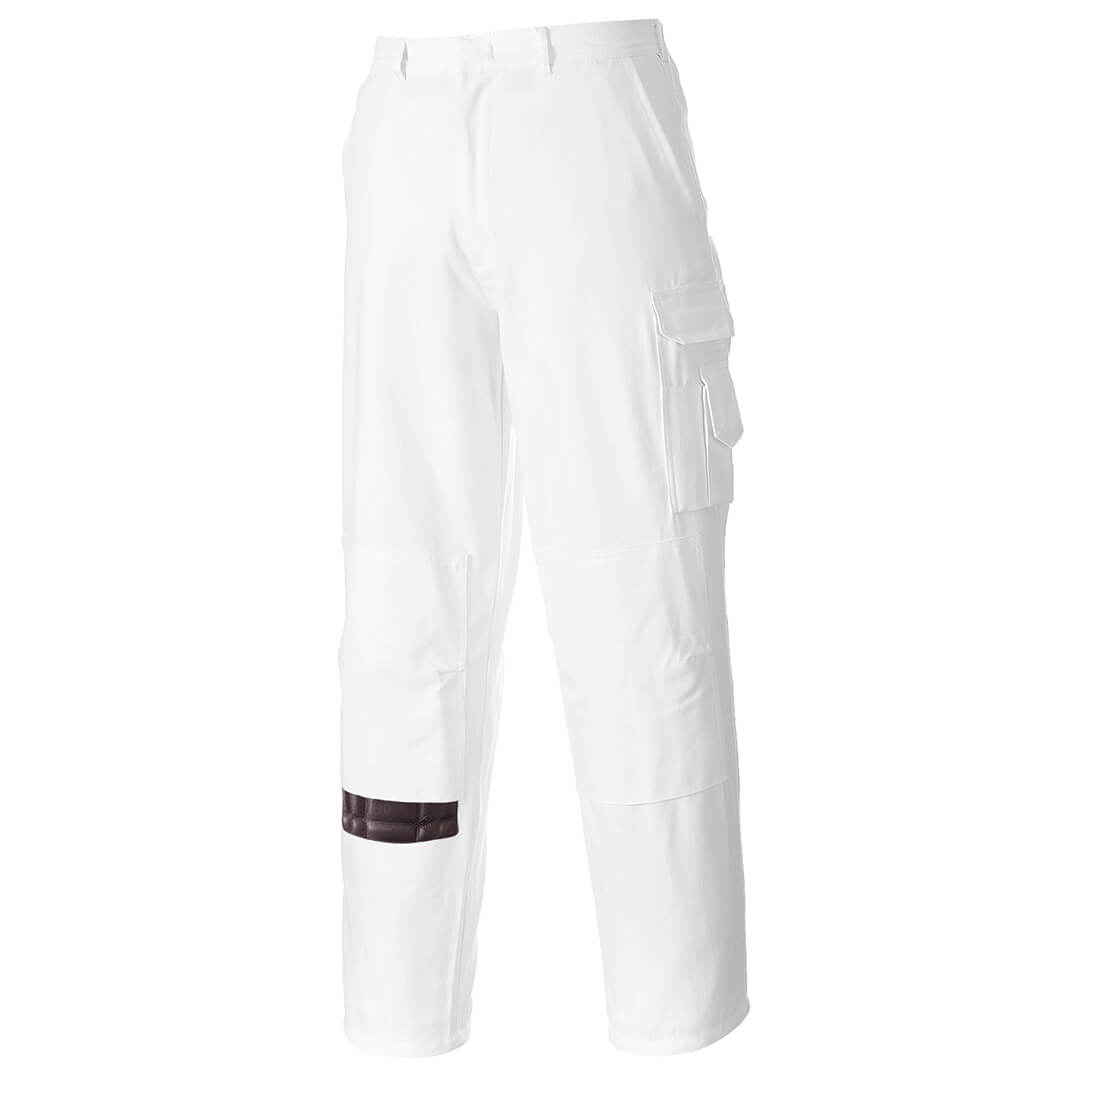 Image of Portwest Painters Trousers White XL 33"